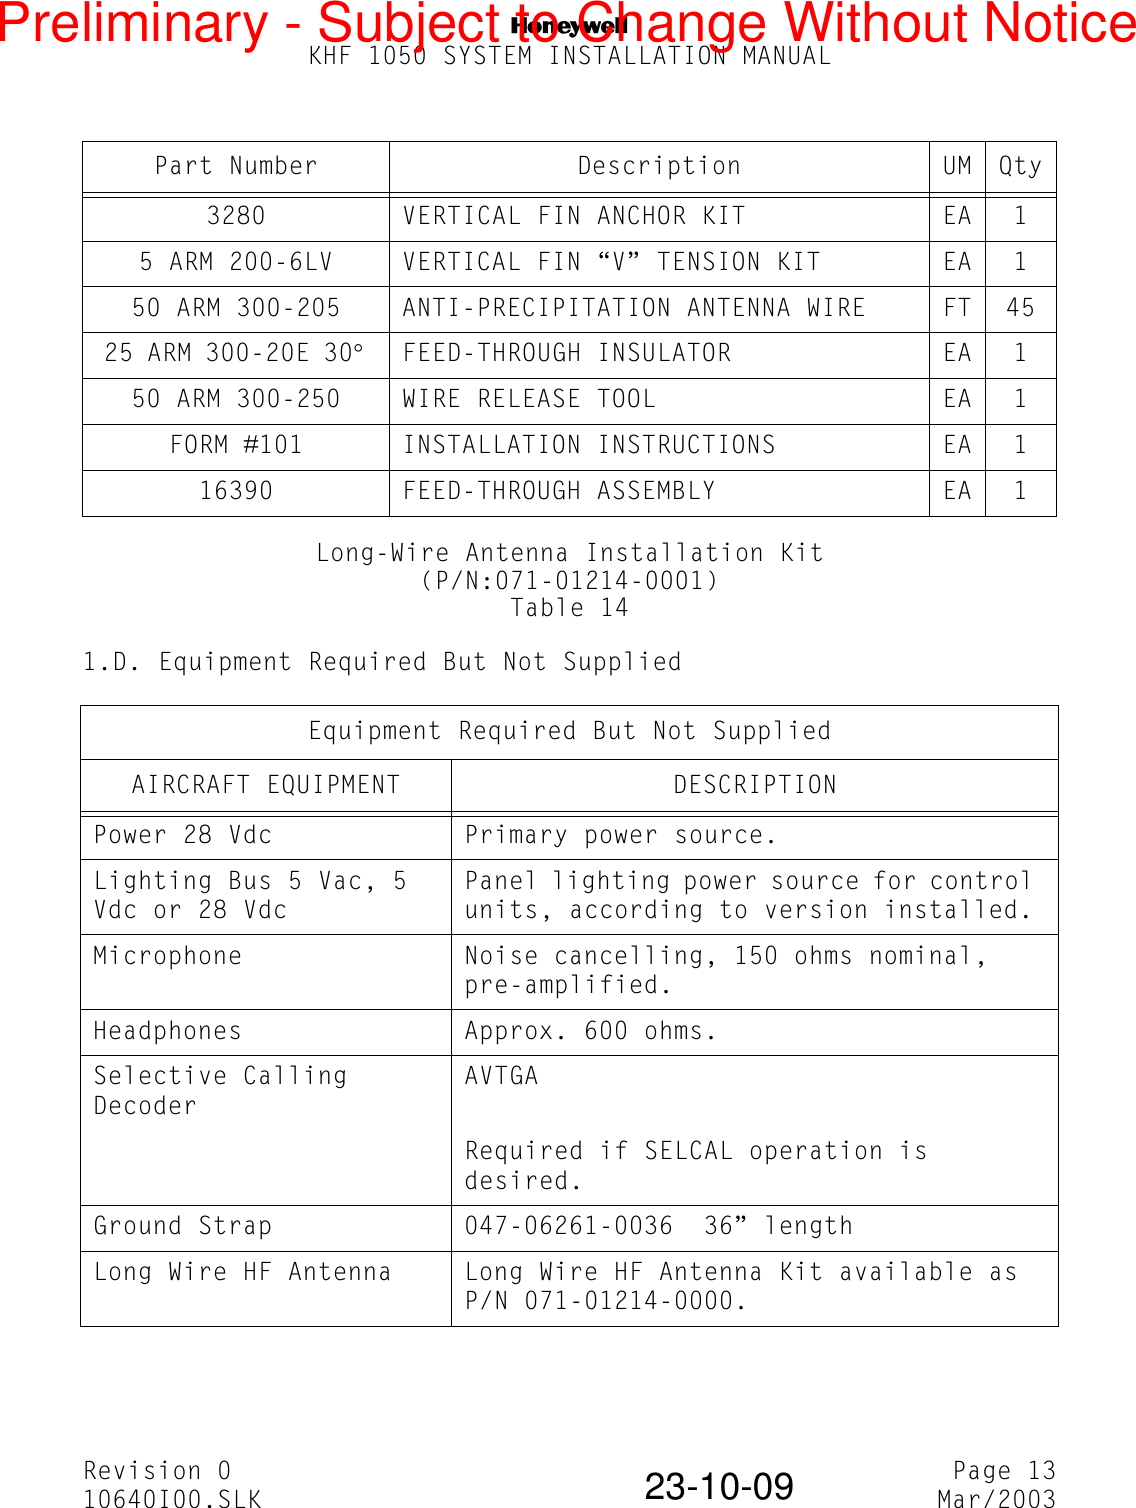 NKHF 1050 SYSTEM INSTALLATION MANUALRevision 0 Page 1310640I00.SLK Mar/200323-10-09Long-Wire Antenna Installation Kit(P/N:071-01214-0001)Table 141.D. Equipment Required But Not SuppliedPart Number Description UM Qty3280 VERTICAL FIN ANCHOR KIT EA 15 ARM 200-6LV VERTICAL FIN “V” TENSION KIT EA 150 ARM 300-205 ANTI-PRECIPITATION ANTENNA WIRE FT 4525 ARM 300-20E 30° FEED-THROUGH INSULATOR EA 150 ARM 300-250 WIRE RELEASE TOOL EA 1FORM #101 INSTALLATION INSTRUCTIONS EA 116390 FEED-THROUGH ASSEMBLY EA 1Equipment Required But Not SuppliedAIRCRAFT EQUIPMENT DESCRIPTIONPower 28 Vdc Primary power source.Lighting Bus 5 Vac, 5 Vdc or 28 Vdc Panel lighting power source for control units, according to version installed.Microphone Noise cancelling, 150 ohms nominal, pre-amplified.Headphones Approx. 600 ohms.Selective Calling DecoderAVTGARequired if SELCAL operation is desired. Ground Strap 047-06261-0036  36” lengthLong Wire HF Antenna Long Wire HF Antenna Kit available as P/N 071-01214-0000.Preliminary - Subject to Change Without Notice